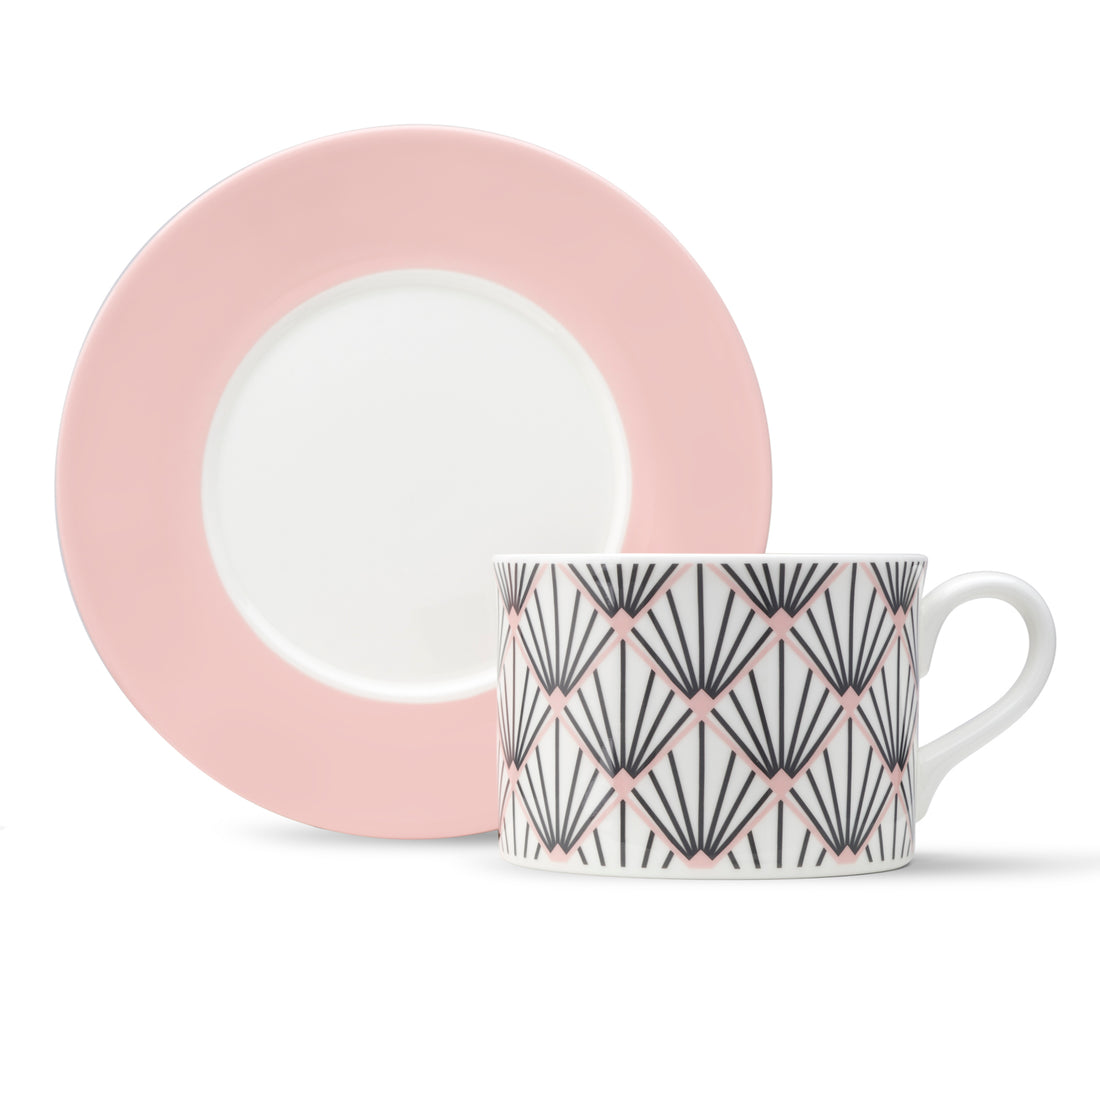 Zighy Cup & Saucer in Grey & Blush Pink [Blush Saucer]